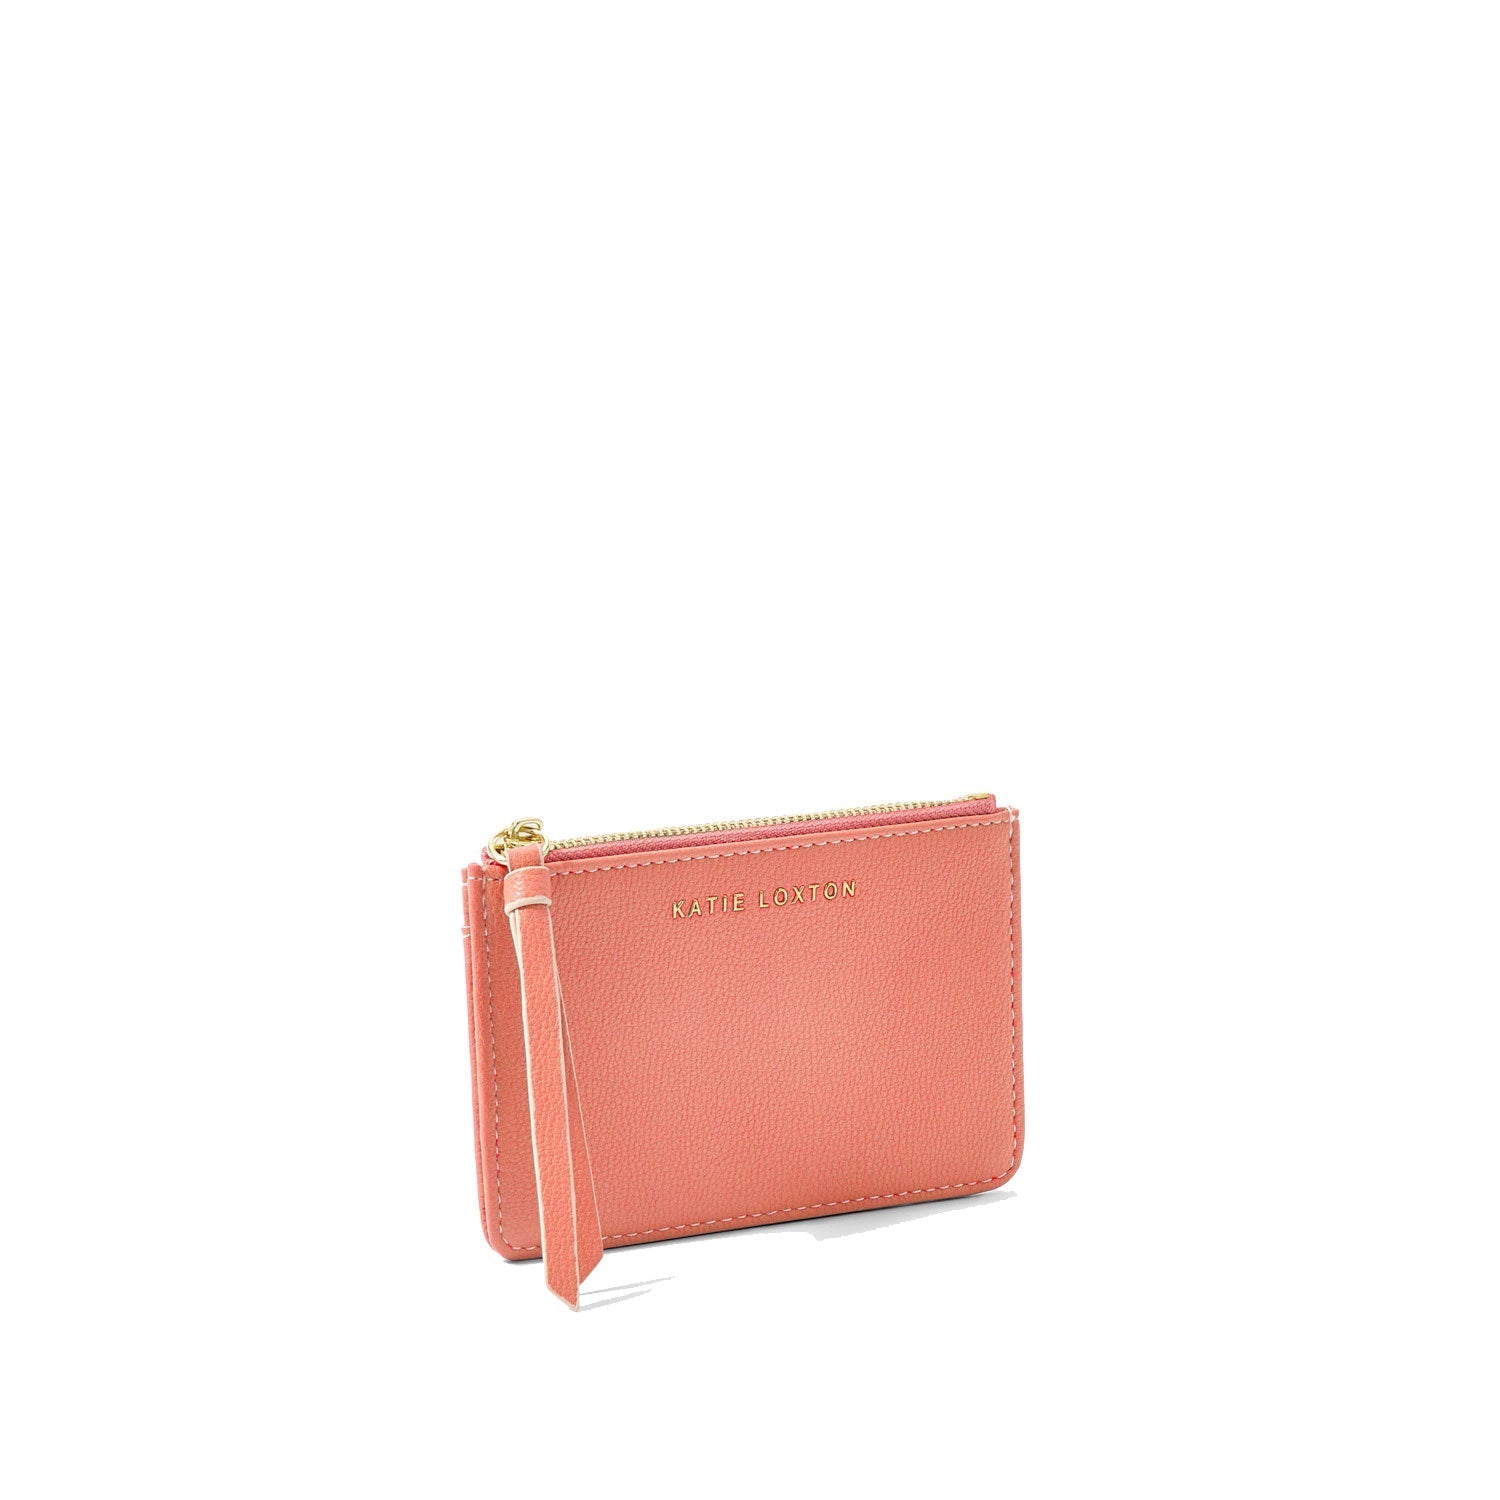 Katie Loxton Purse Coral Katie Loxton Isla Coin Purse / Card Holder - Light Navy / White / Blue / Tan / Lilac / Coral